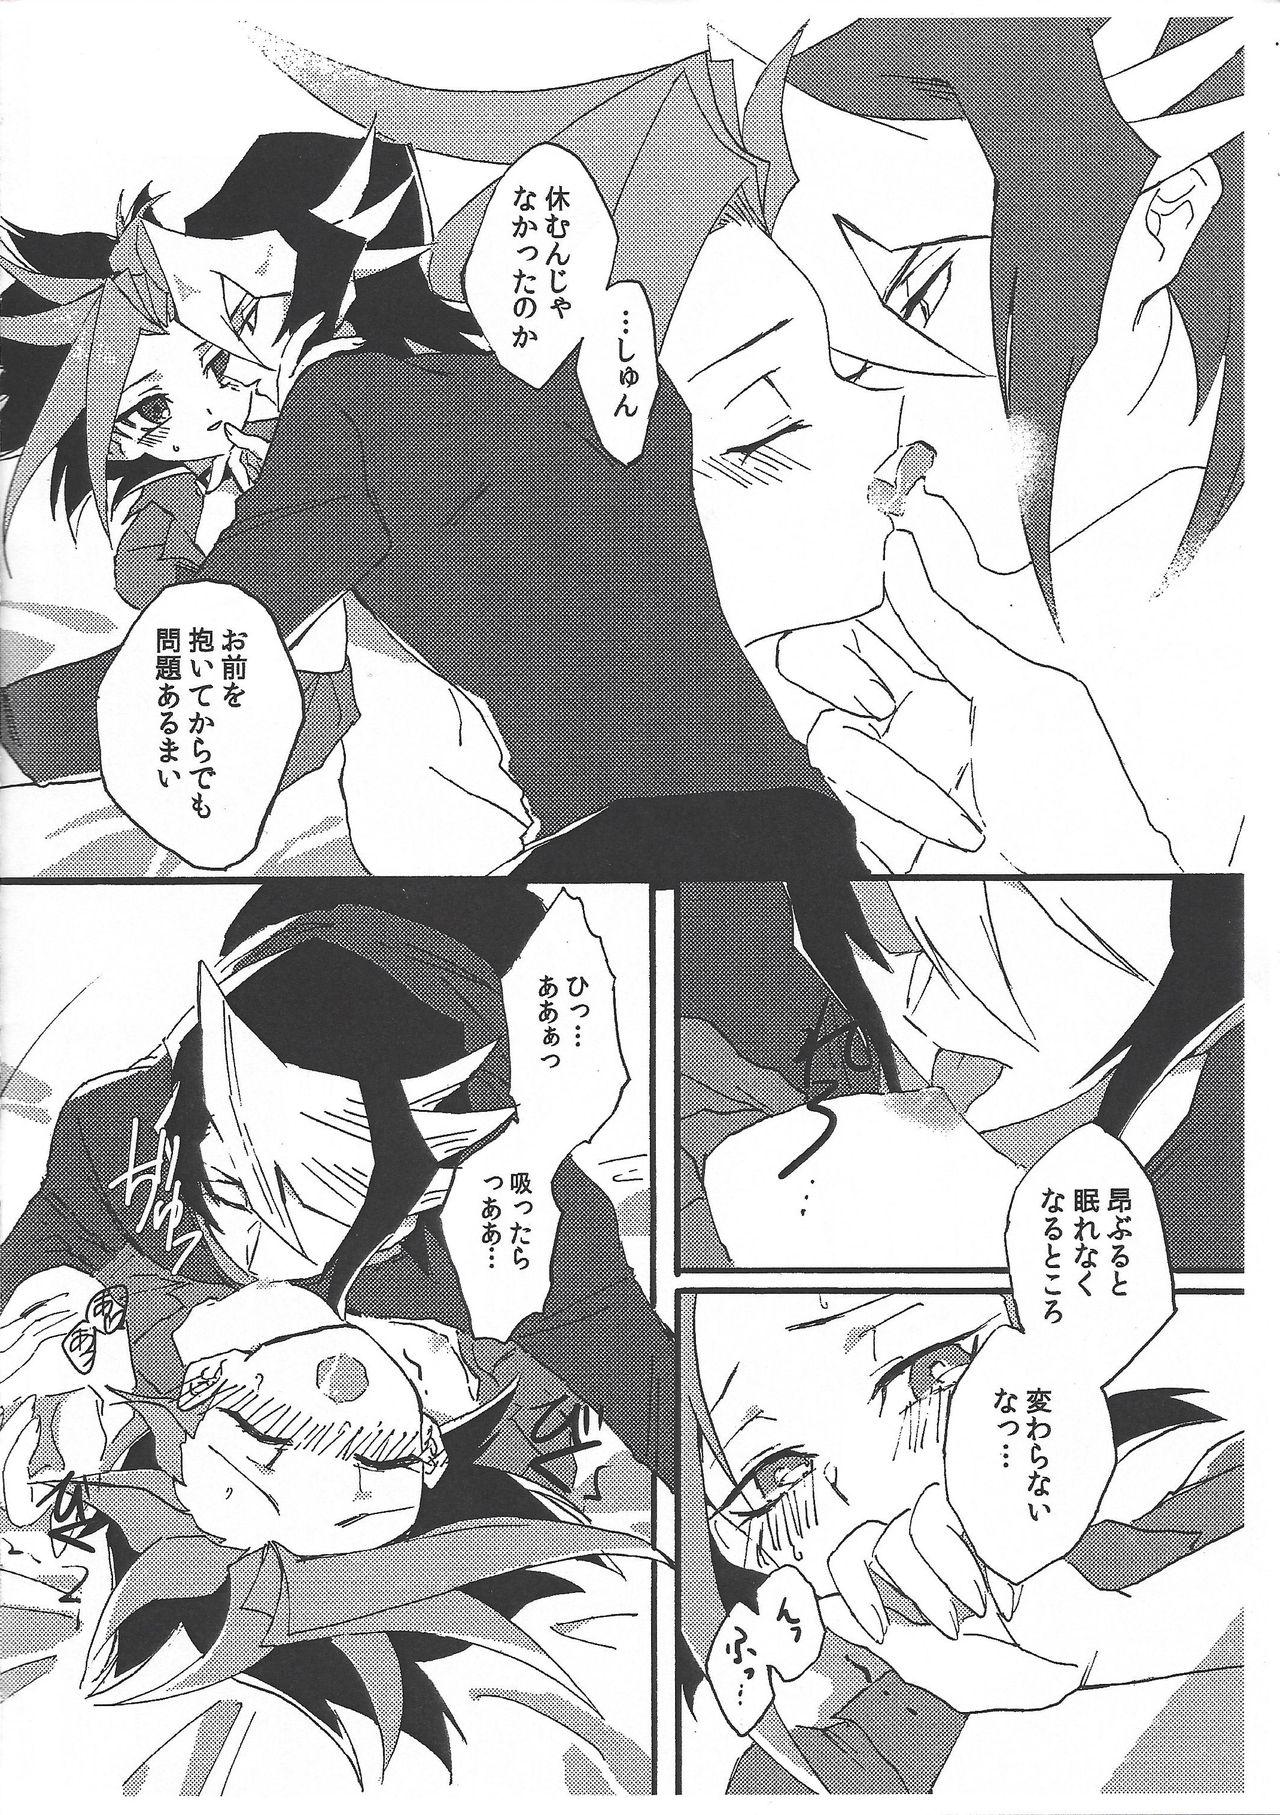 T Girl GHOST ROOM - Yu gi oh arc v Boss - Page 5